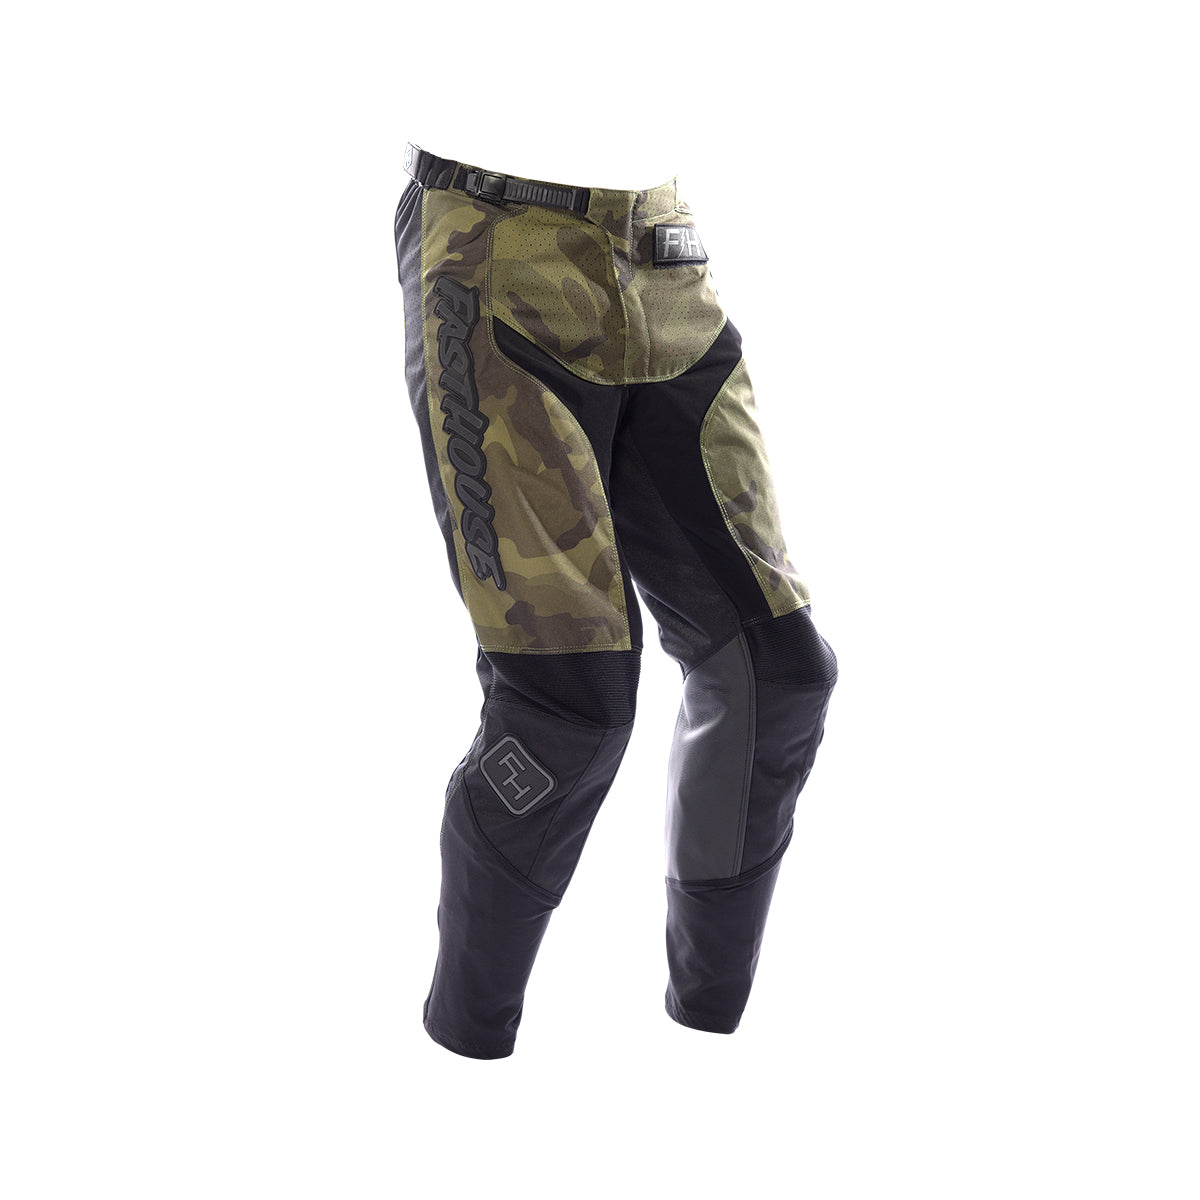 Grindhouse Youth Pant - Camo